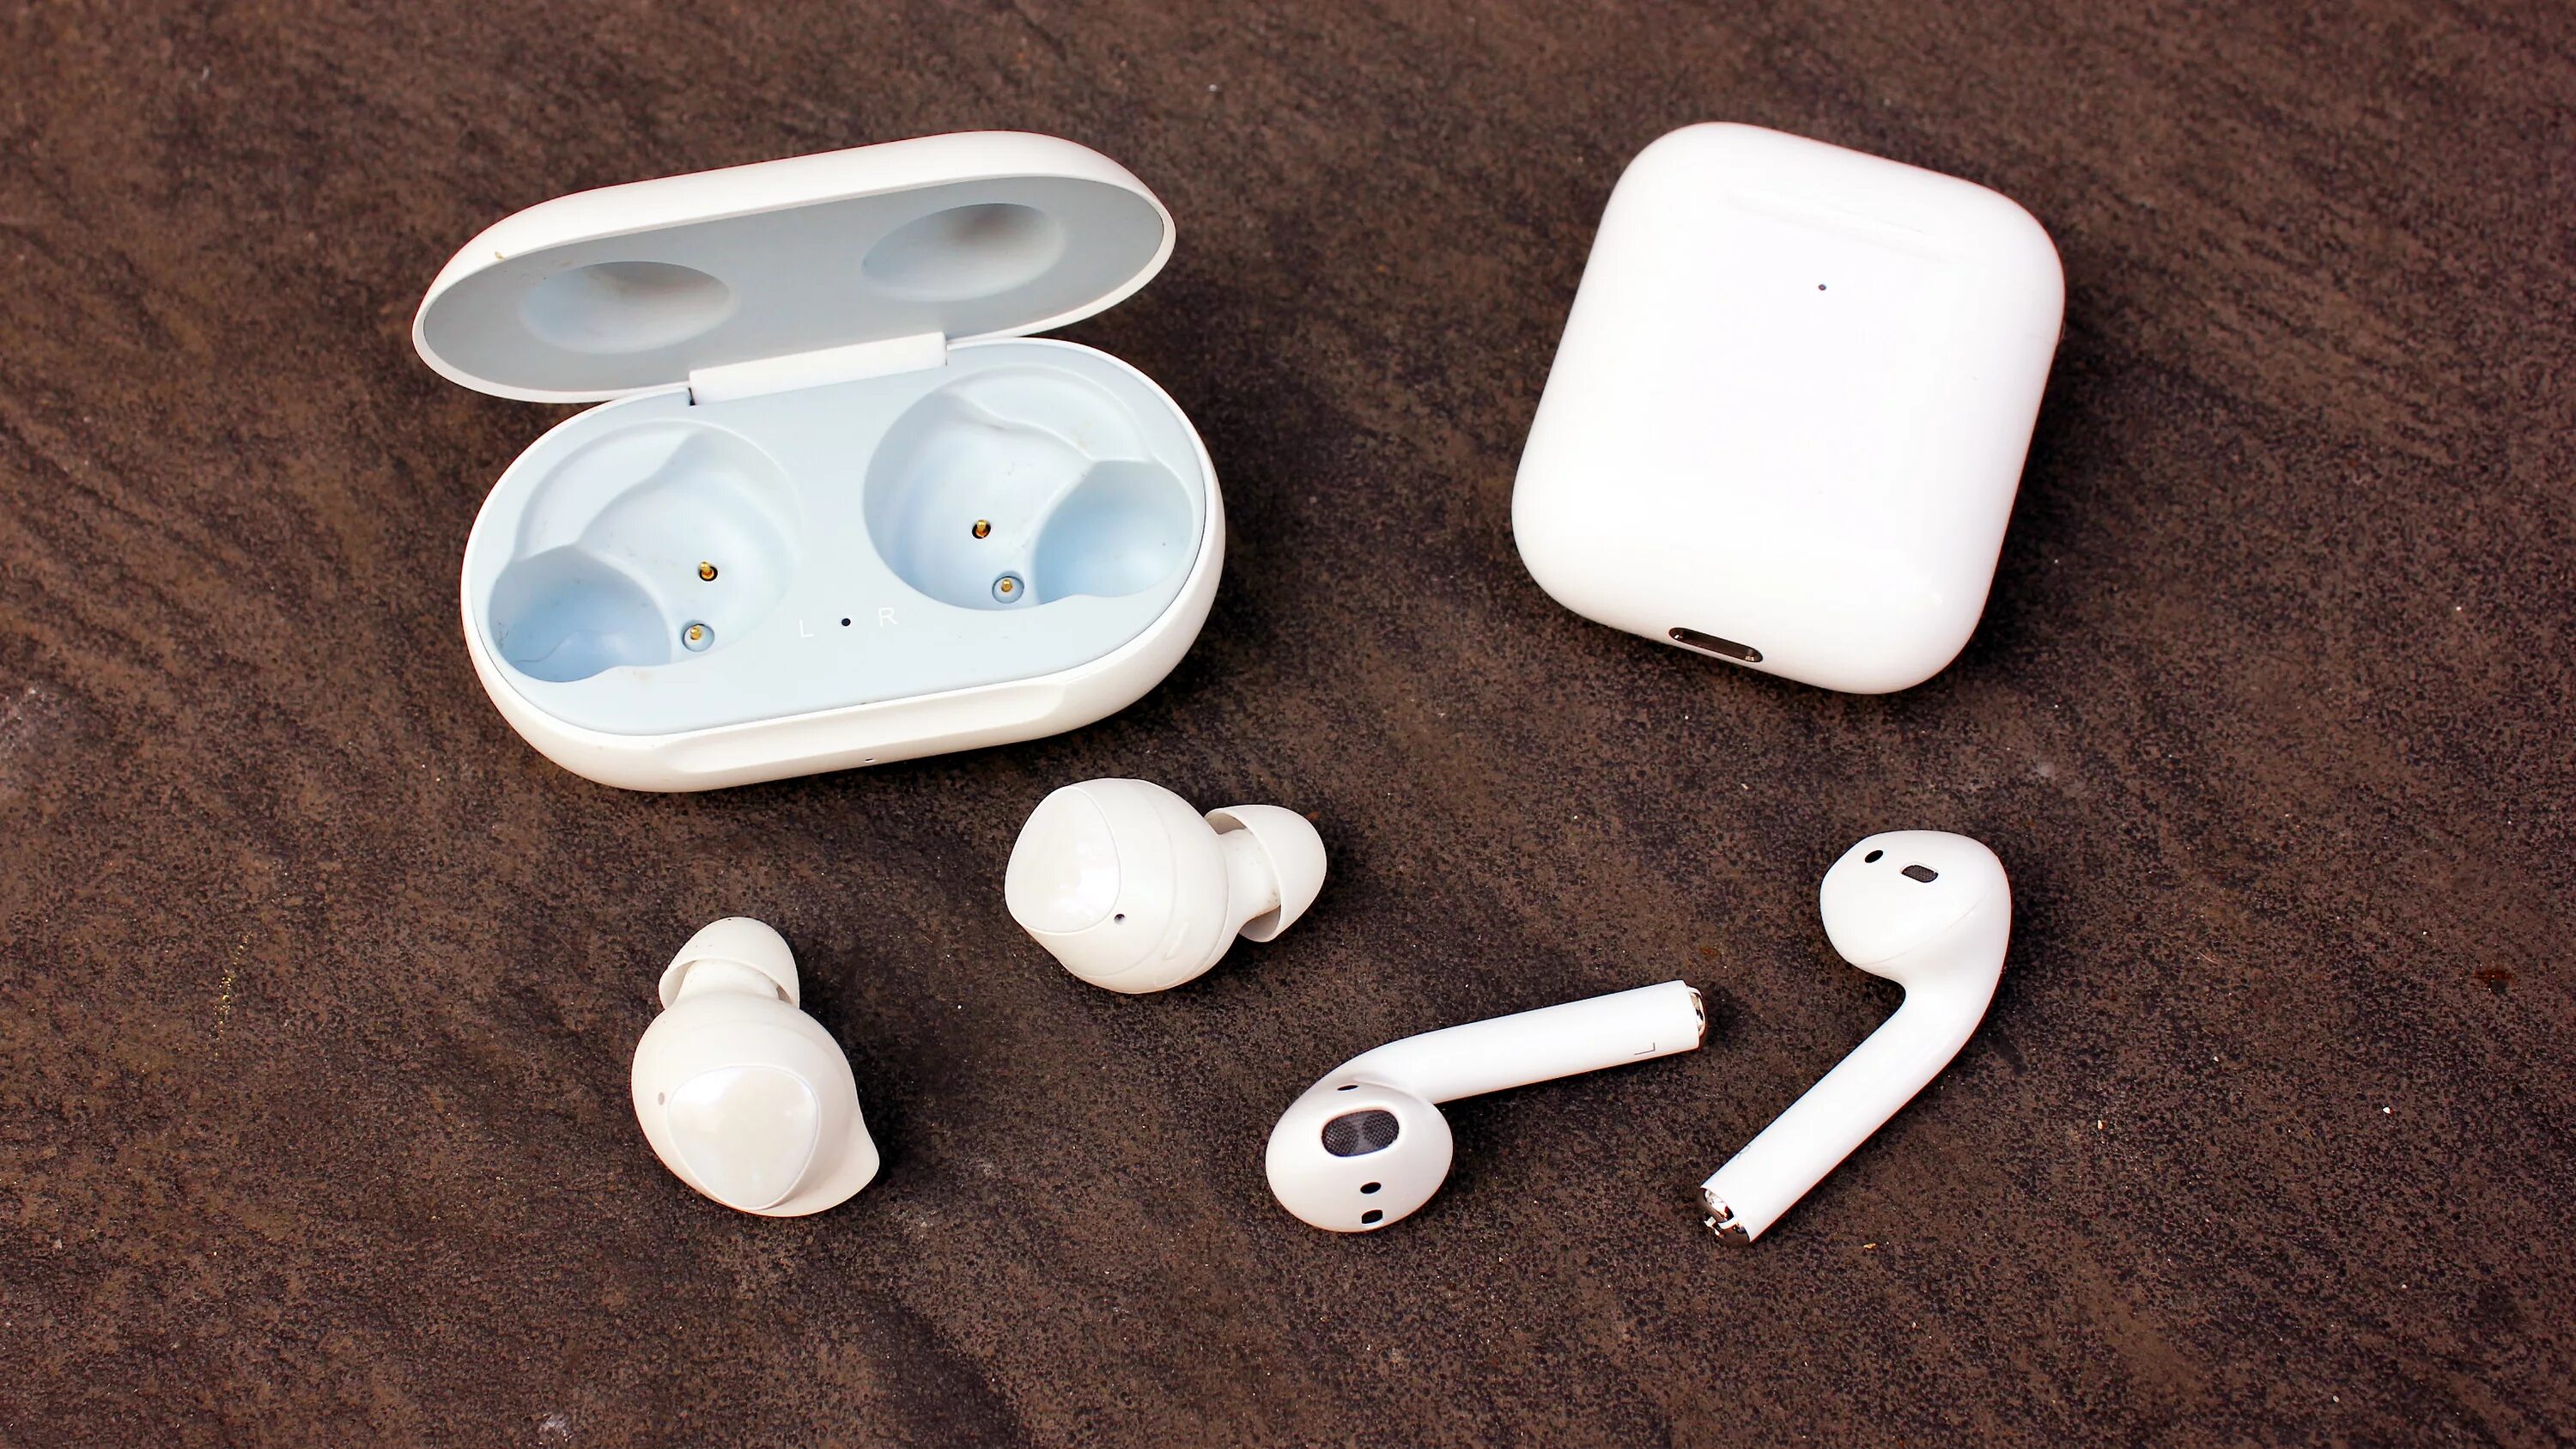 Buds pro airpods pro. Samsung AIRPODS. Apple AIRPODS 4. Samsung AIRPODS 2. AIRPODS Samsung Galaxy Buds 2.